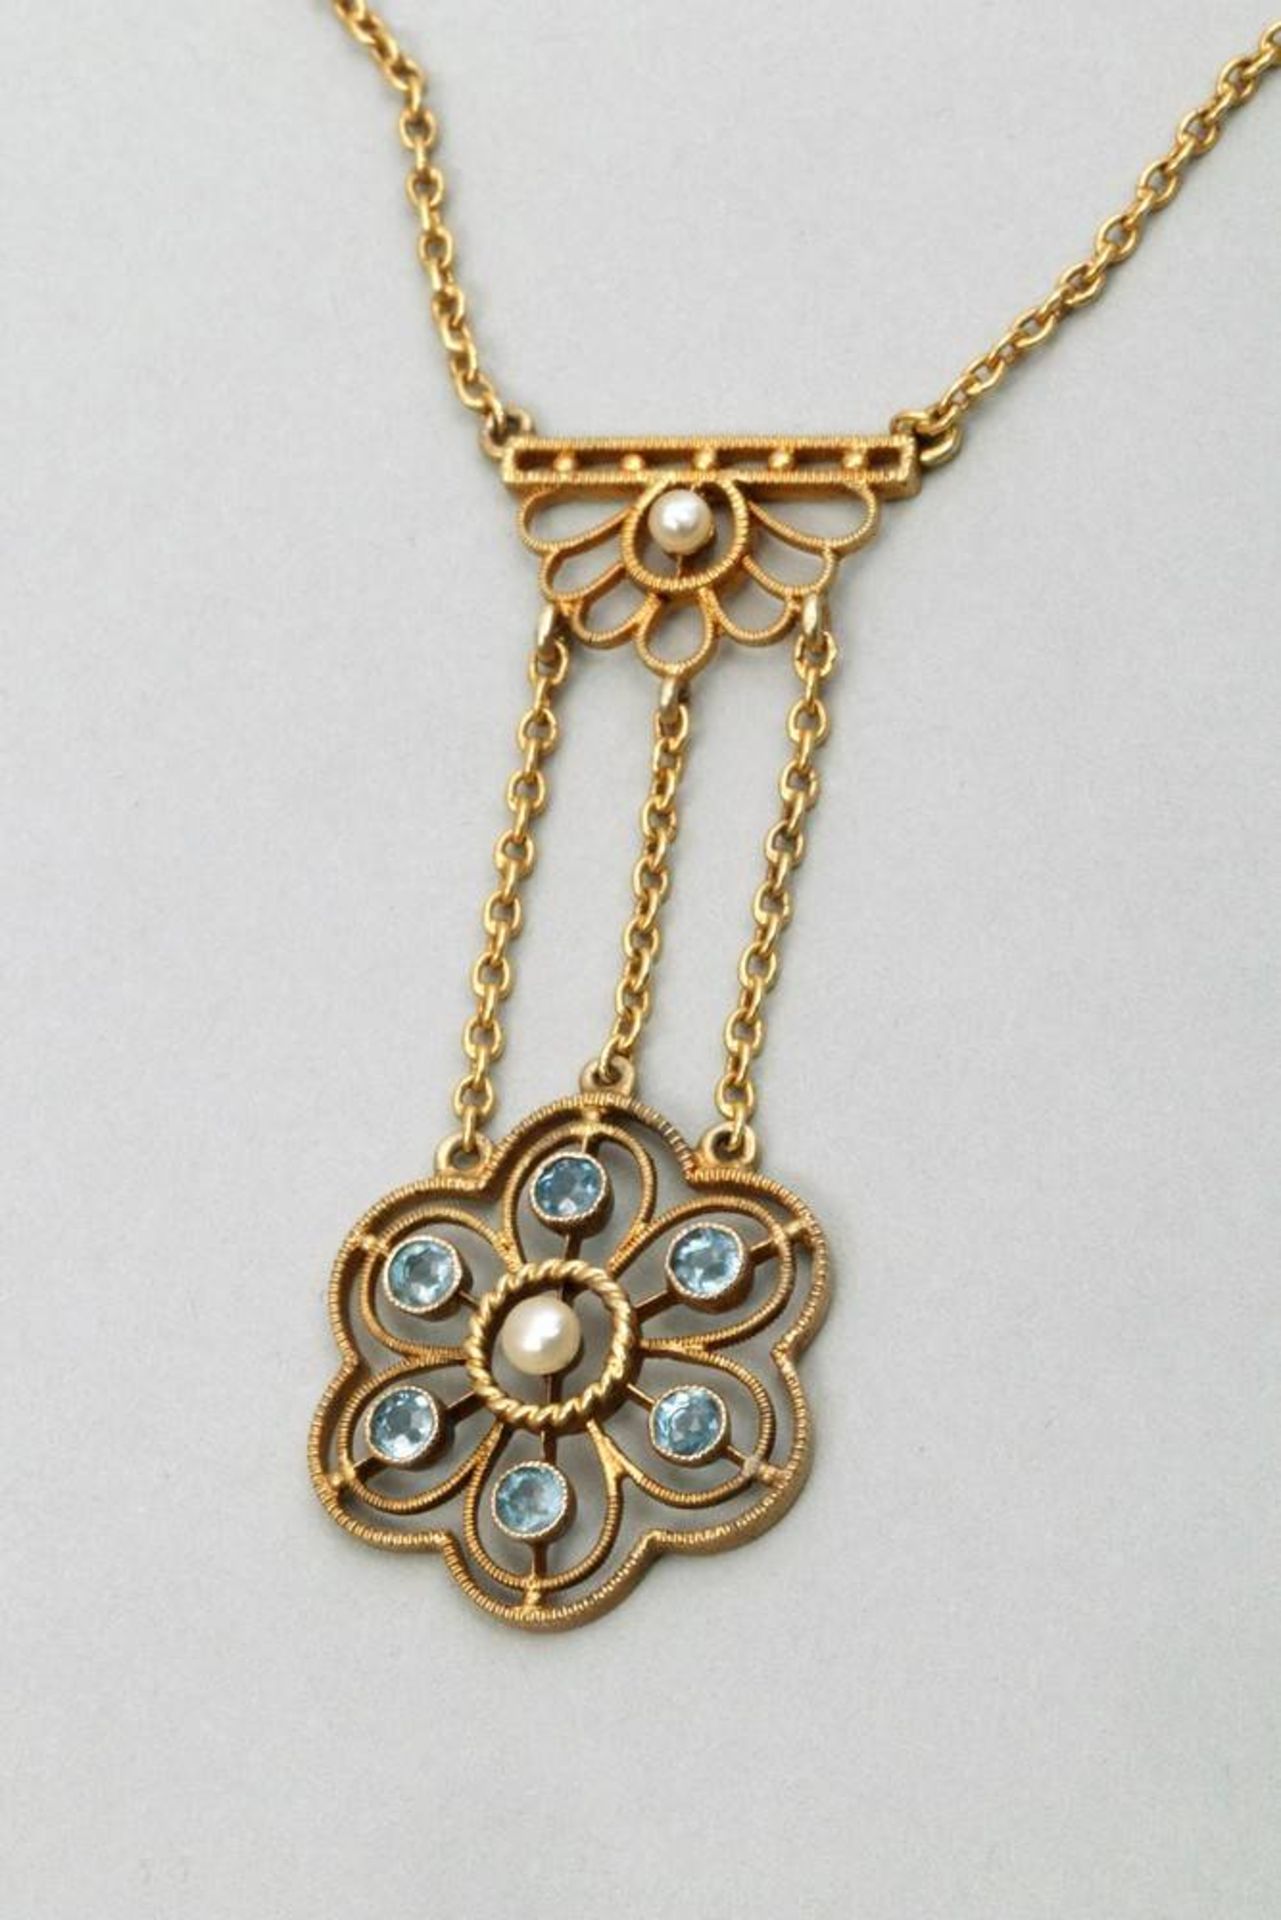 Art Nouveau collier 20/22kt gold, ca. 1900, set with pearls and blue stones, L: 43cm, ca. 4,7g in